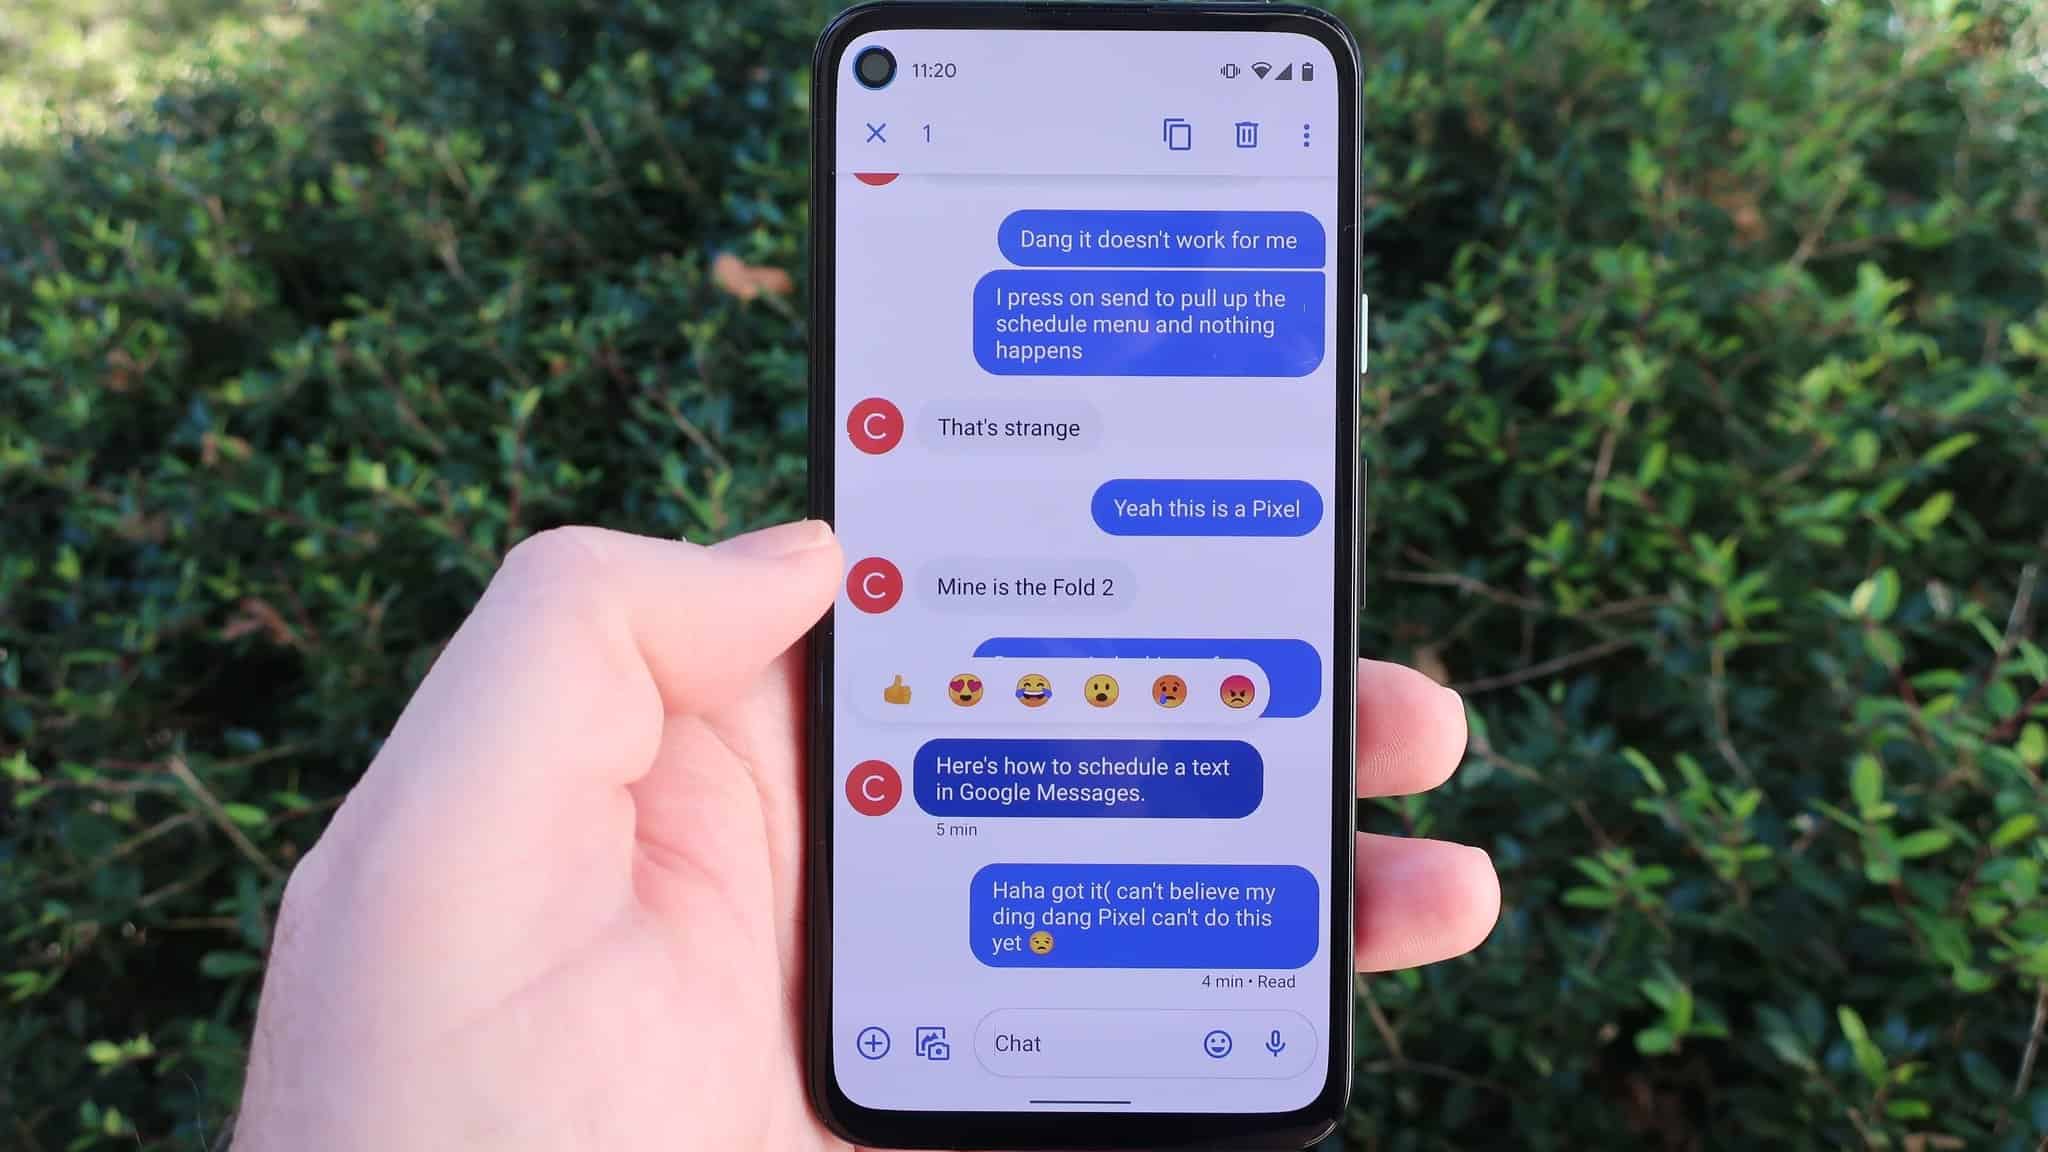 Google Messages vs Samsung Messages Which One is Better?